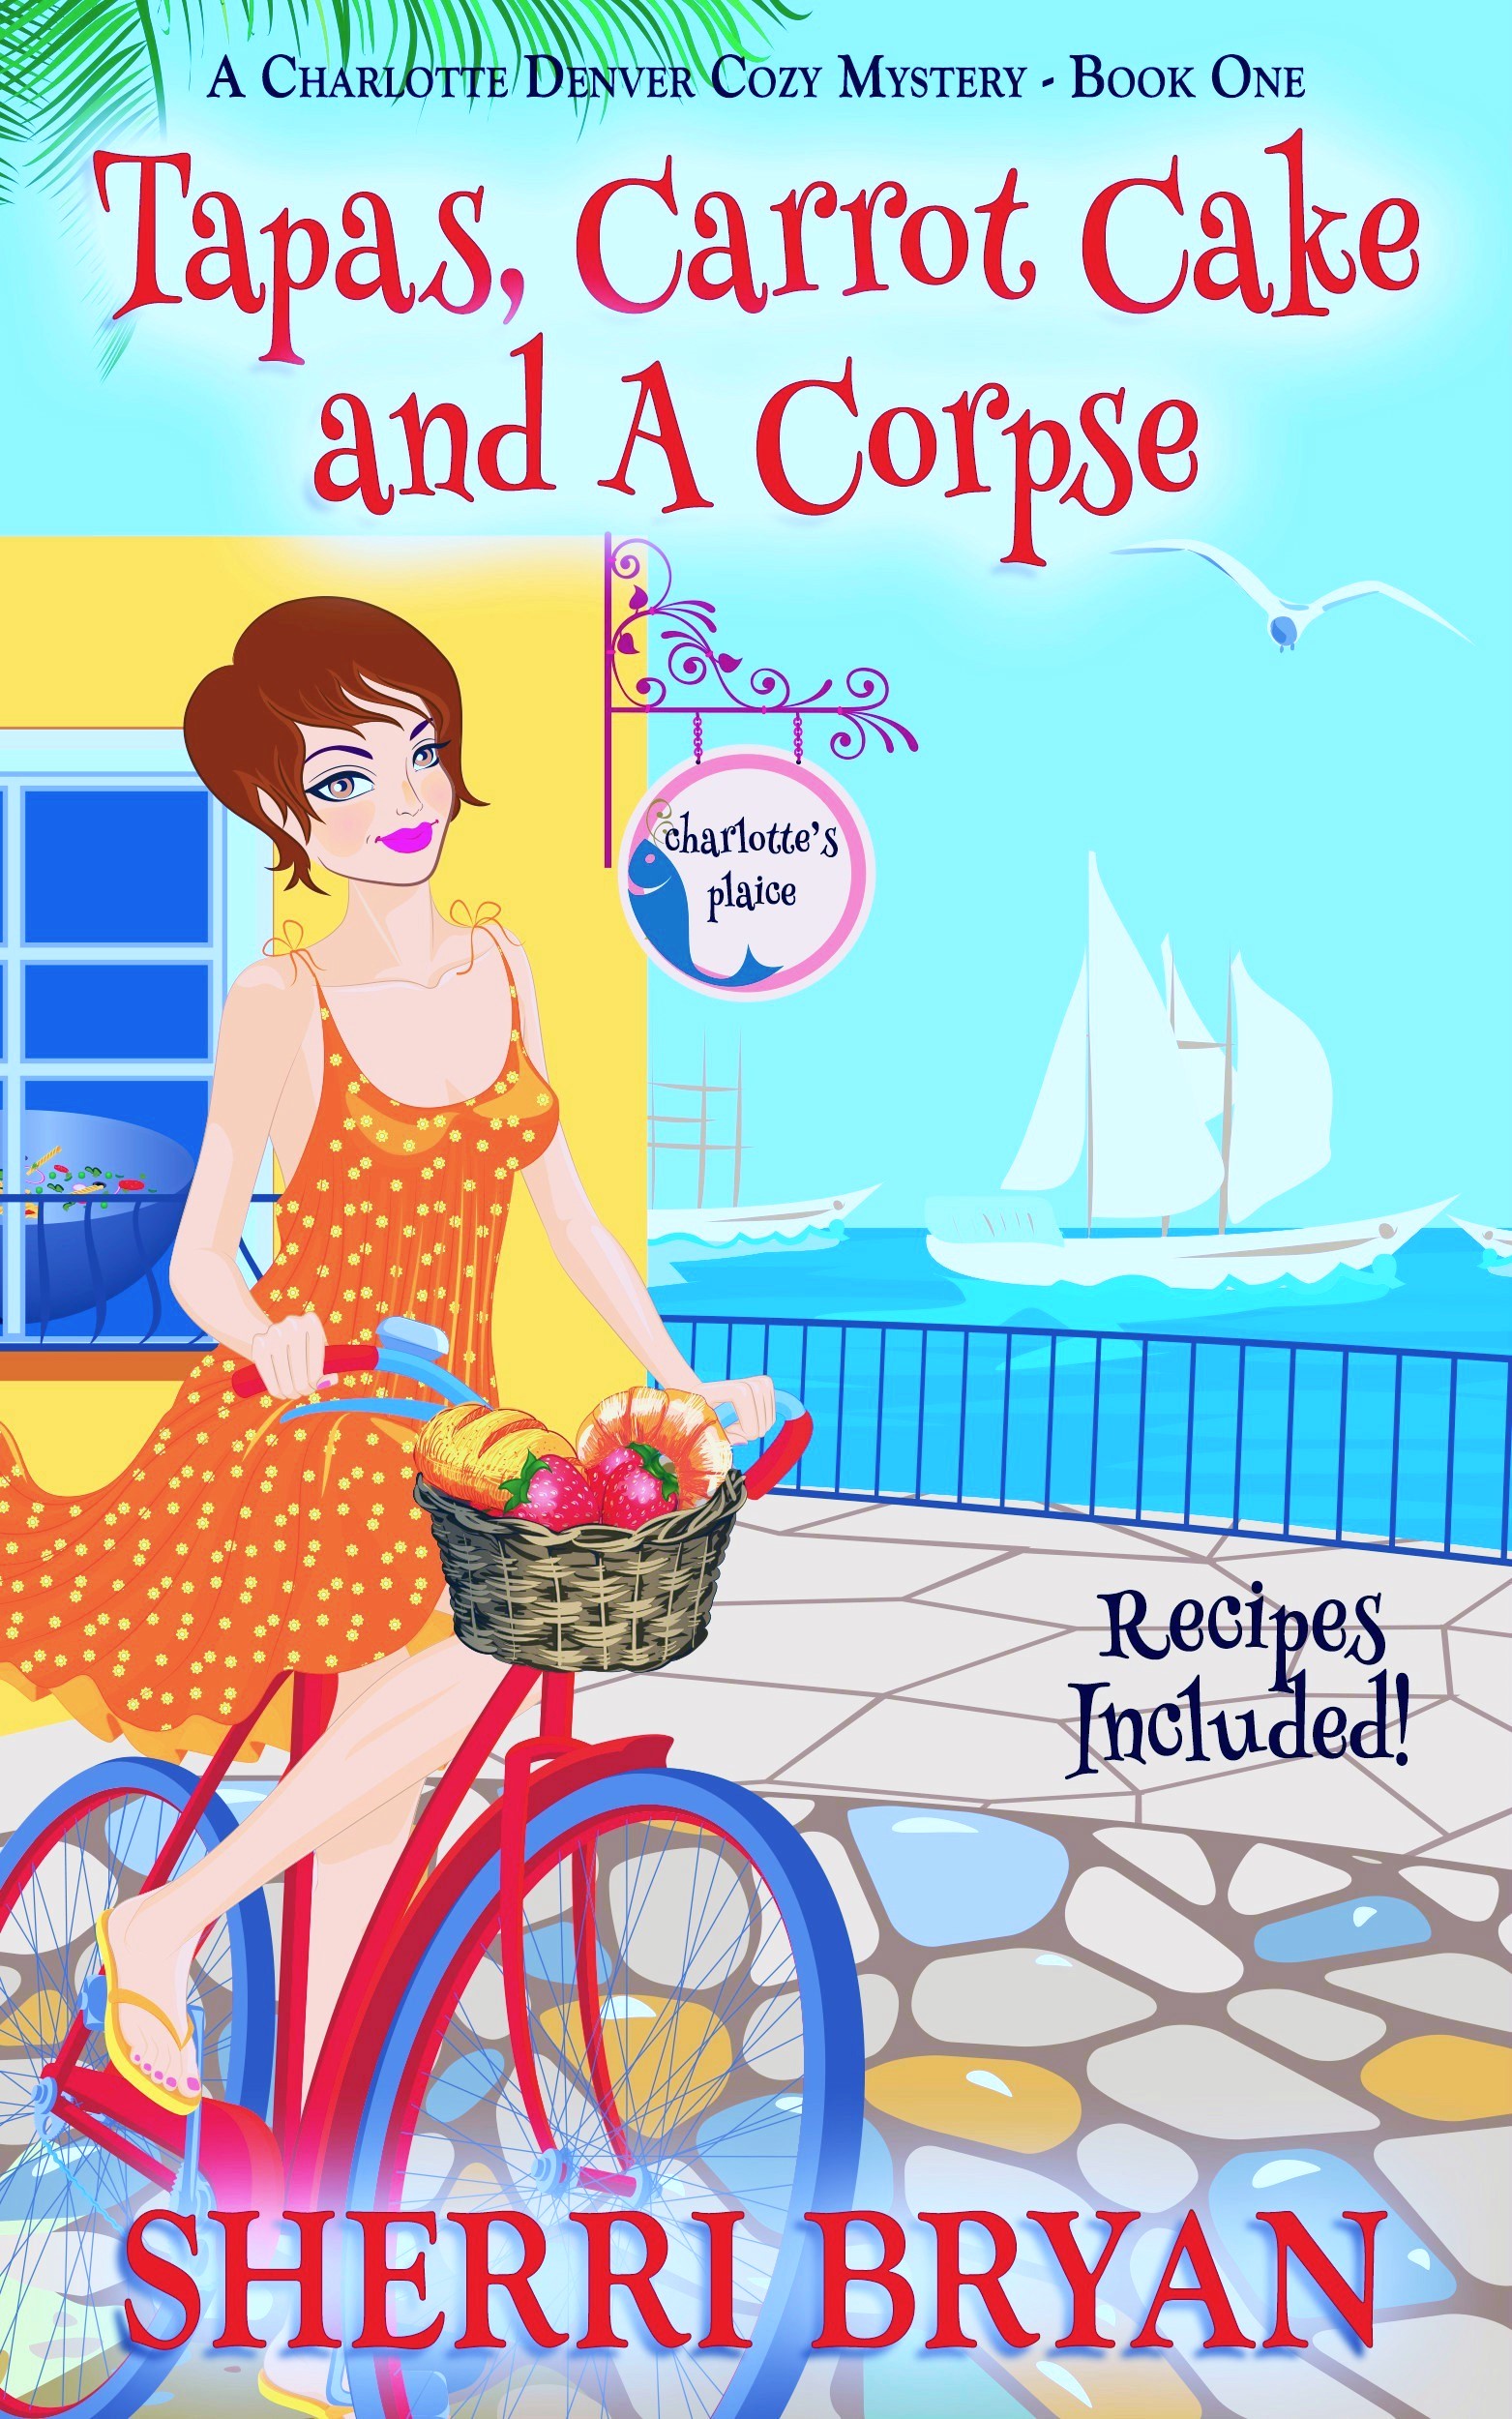 FREE: Tapas, Carrot Cake and a Corpse by Sherri Bryan